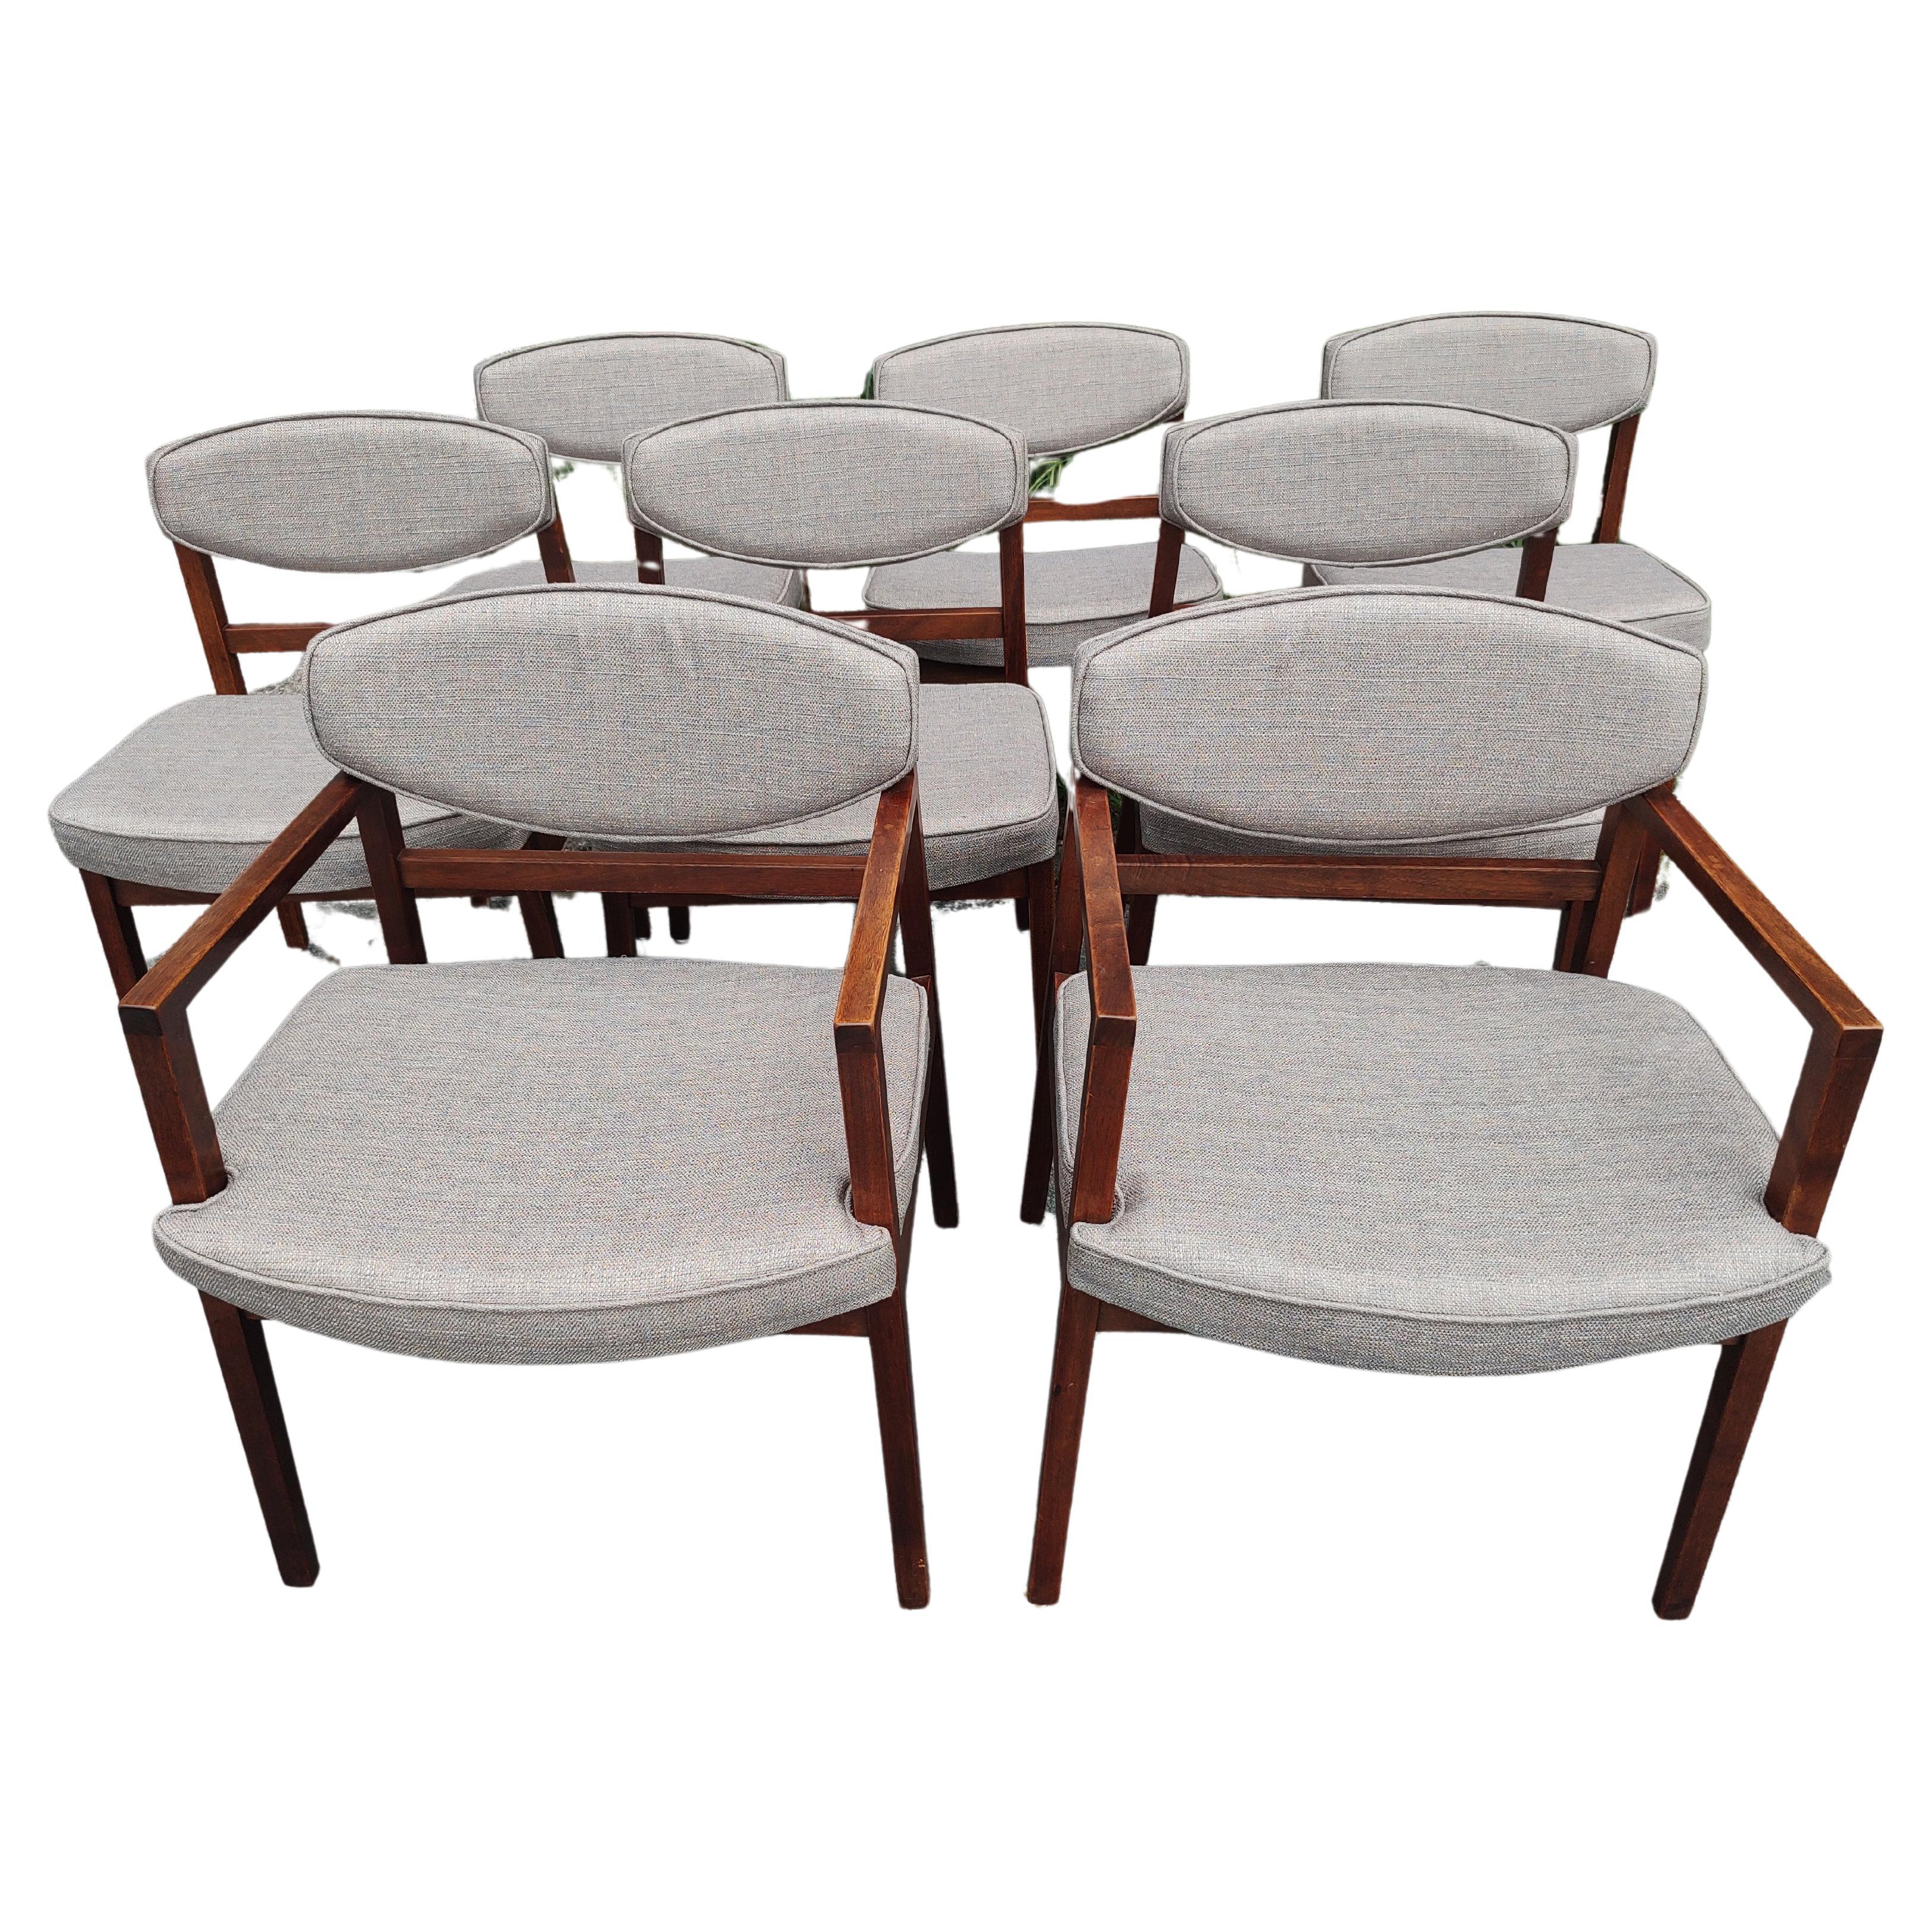 Set of 8 Mid Century Modern Teak Dining Chairs by George Nelson - Herman Miller In Good Condition For Sale In Port Jervis, NY